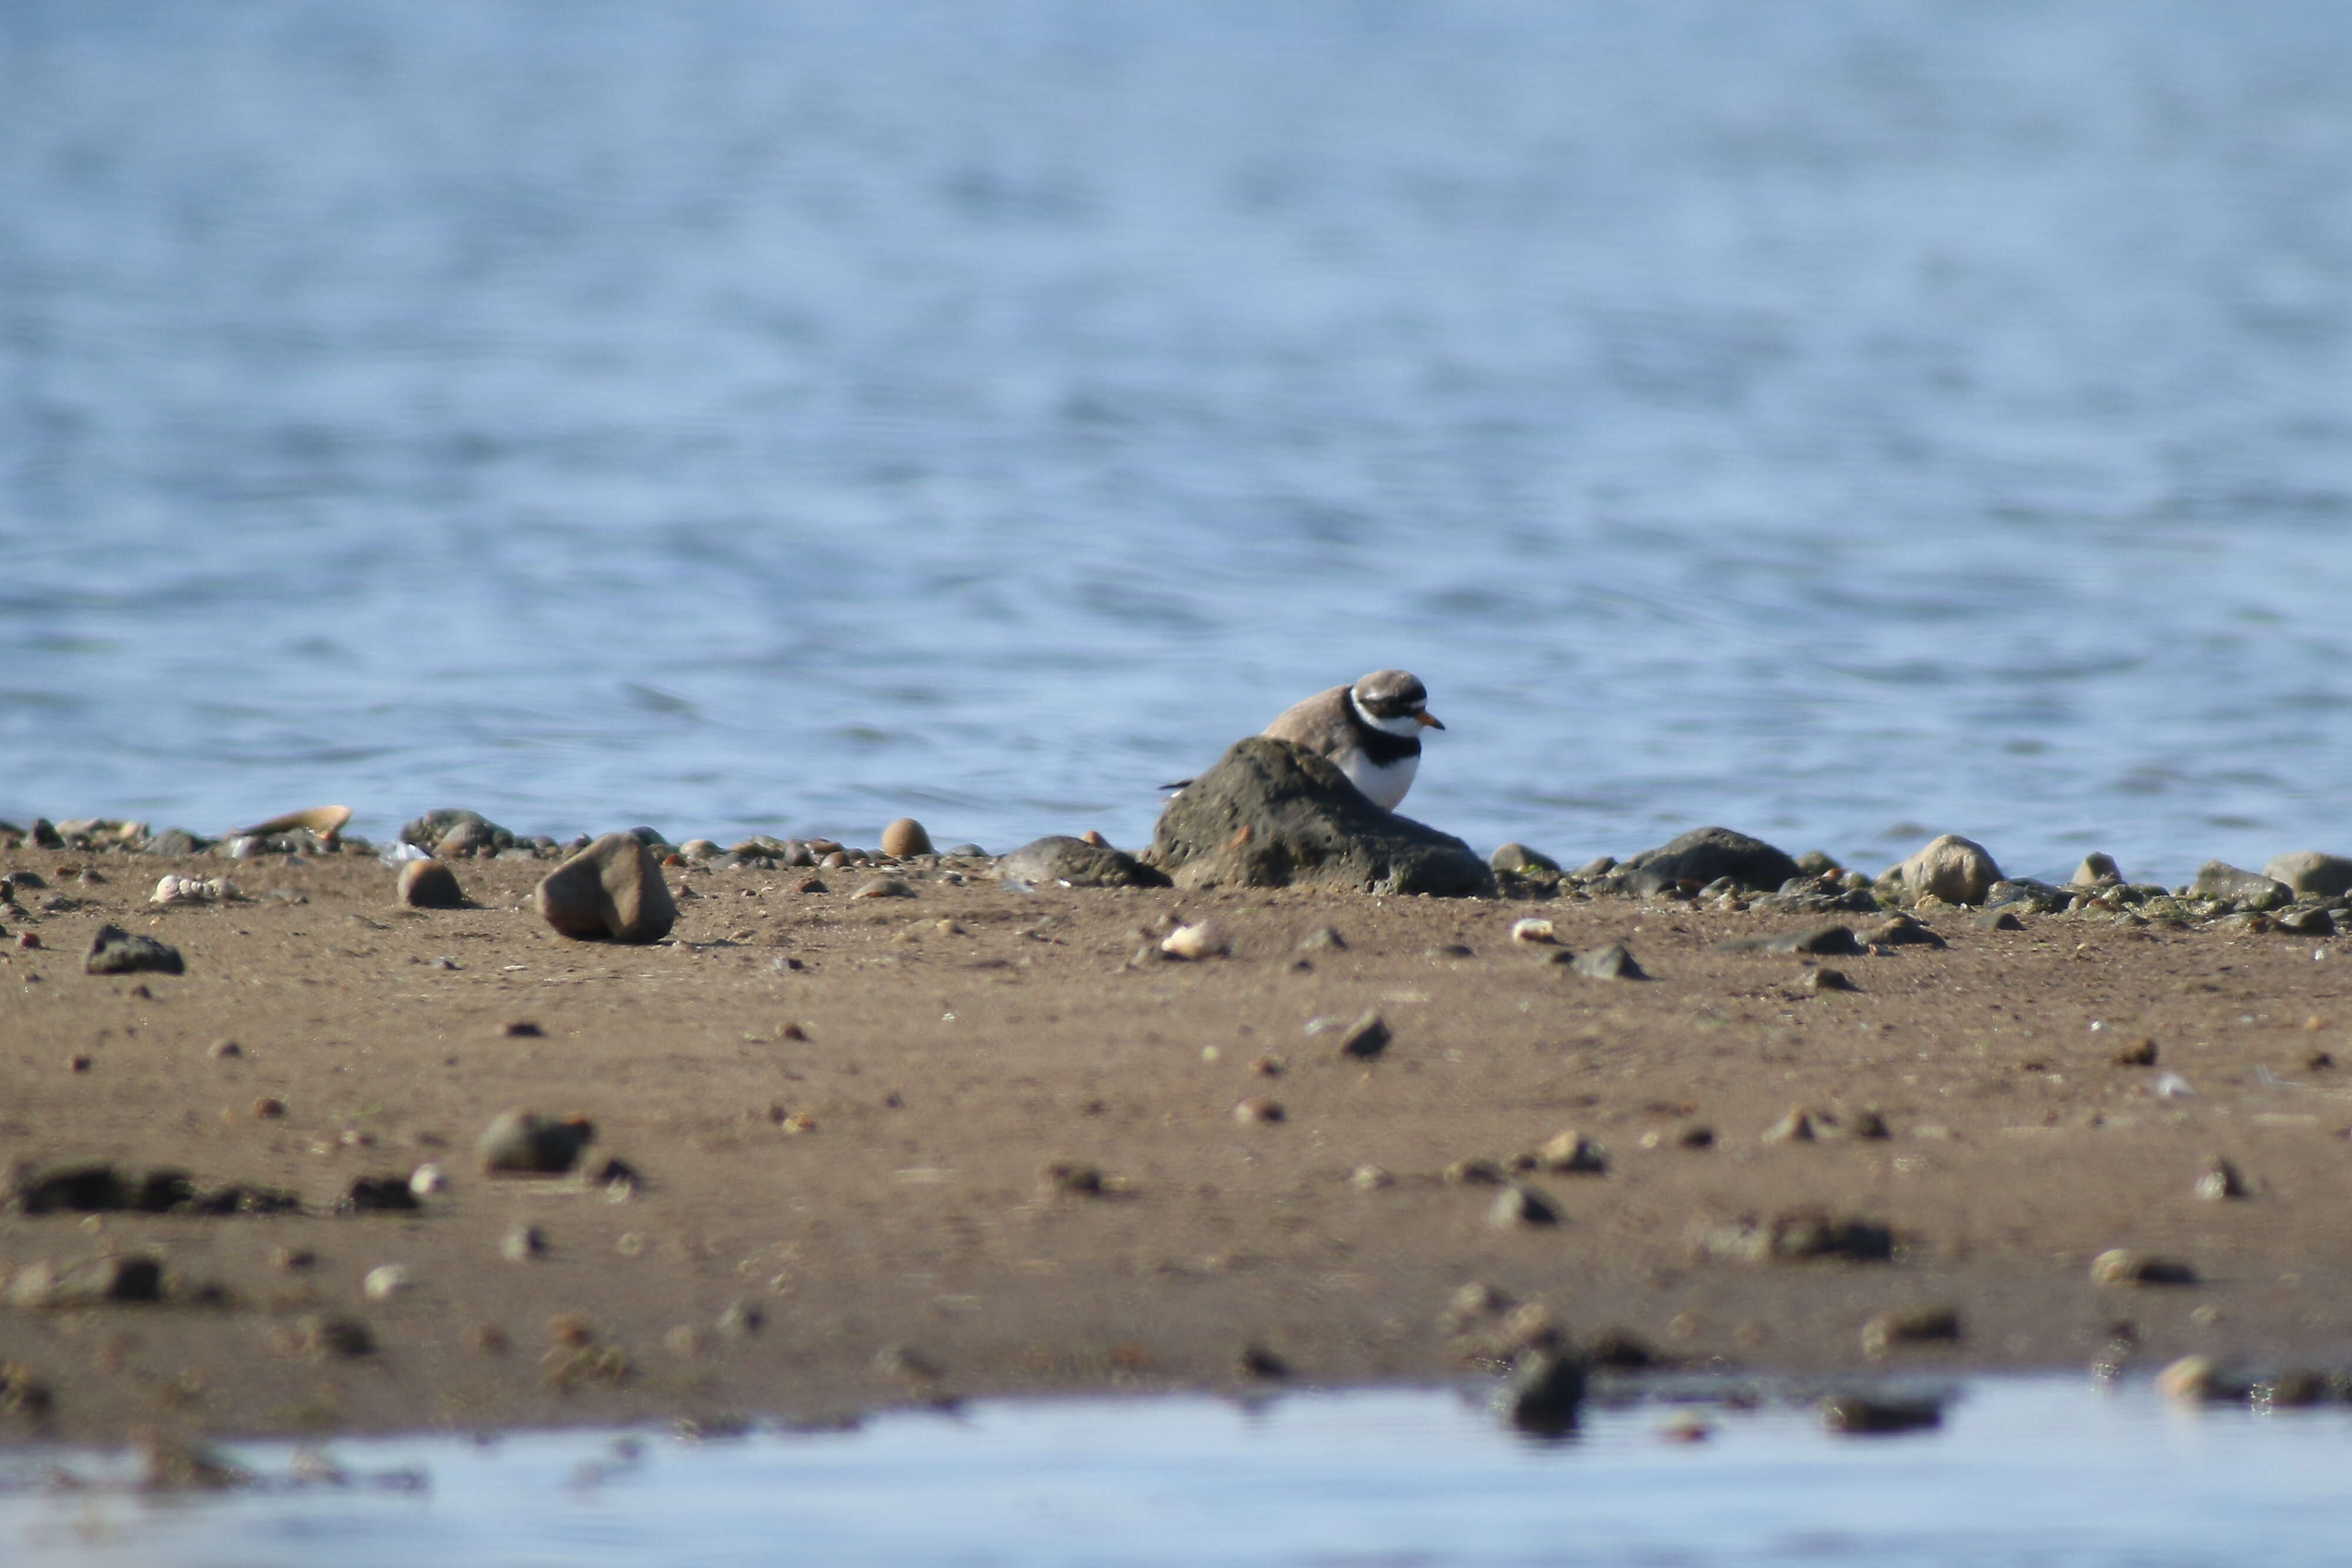 Image of ringed plover, common ringed plover